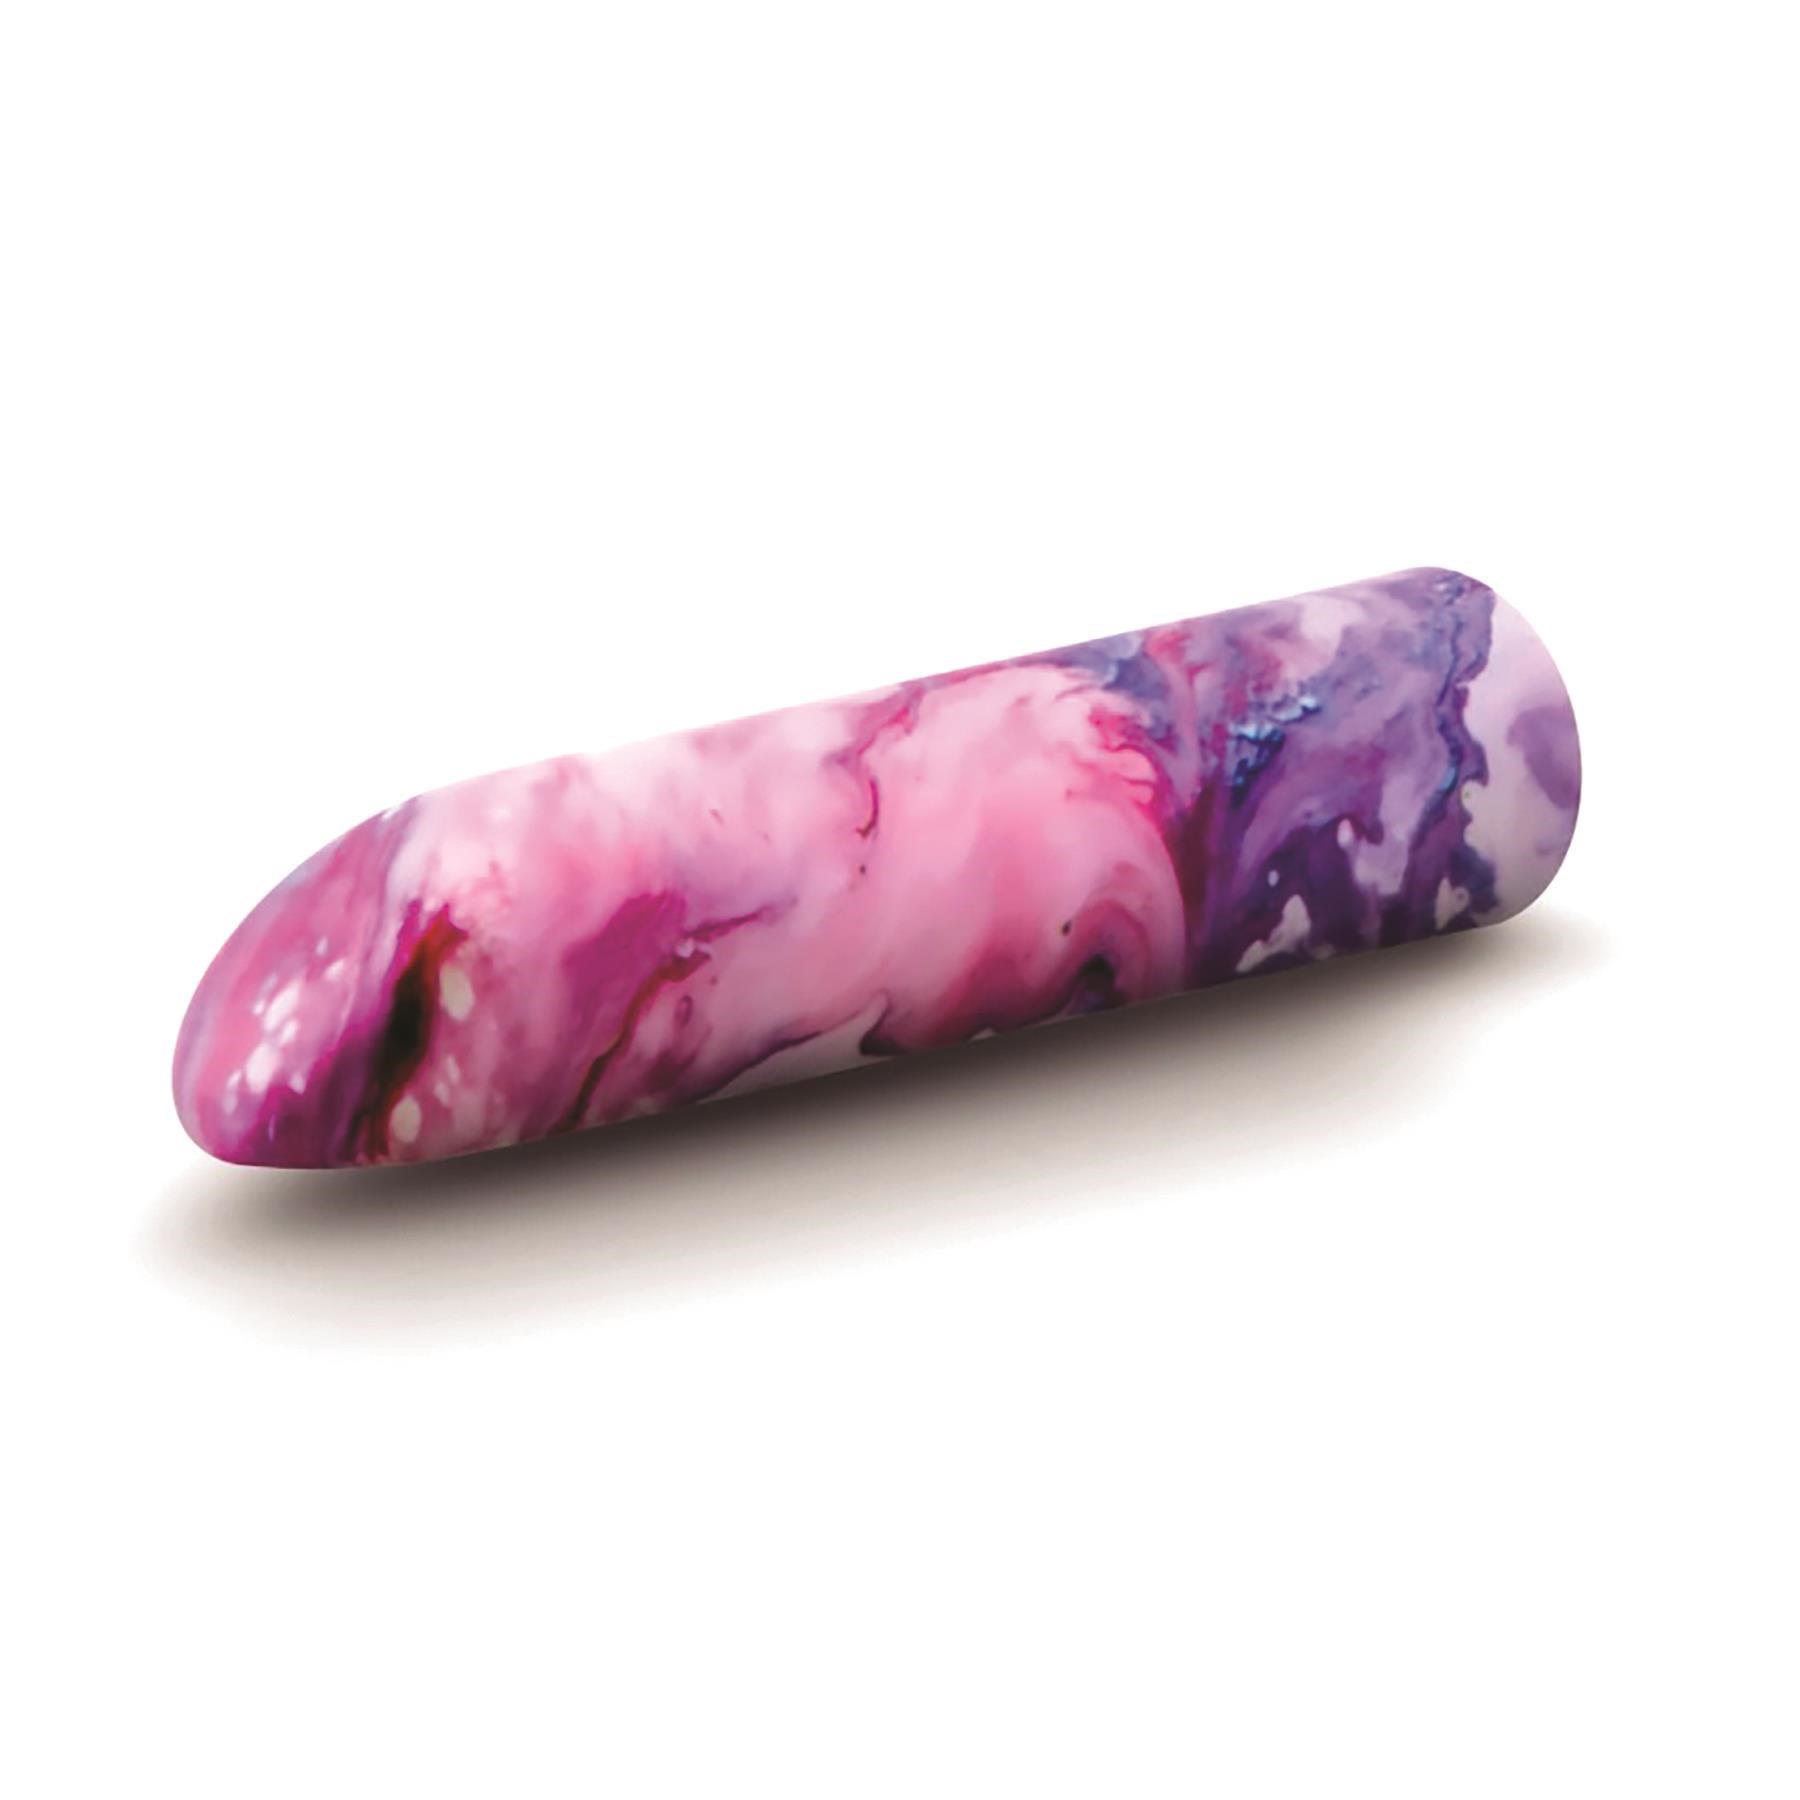 Limited Addiction Rechargeable Power Bullet - Product Shot #2 - Purple